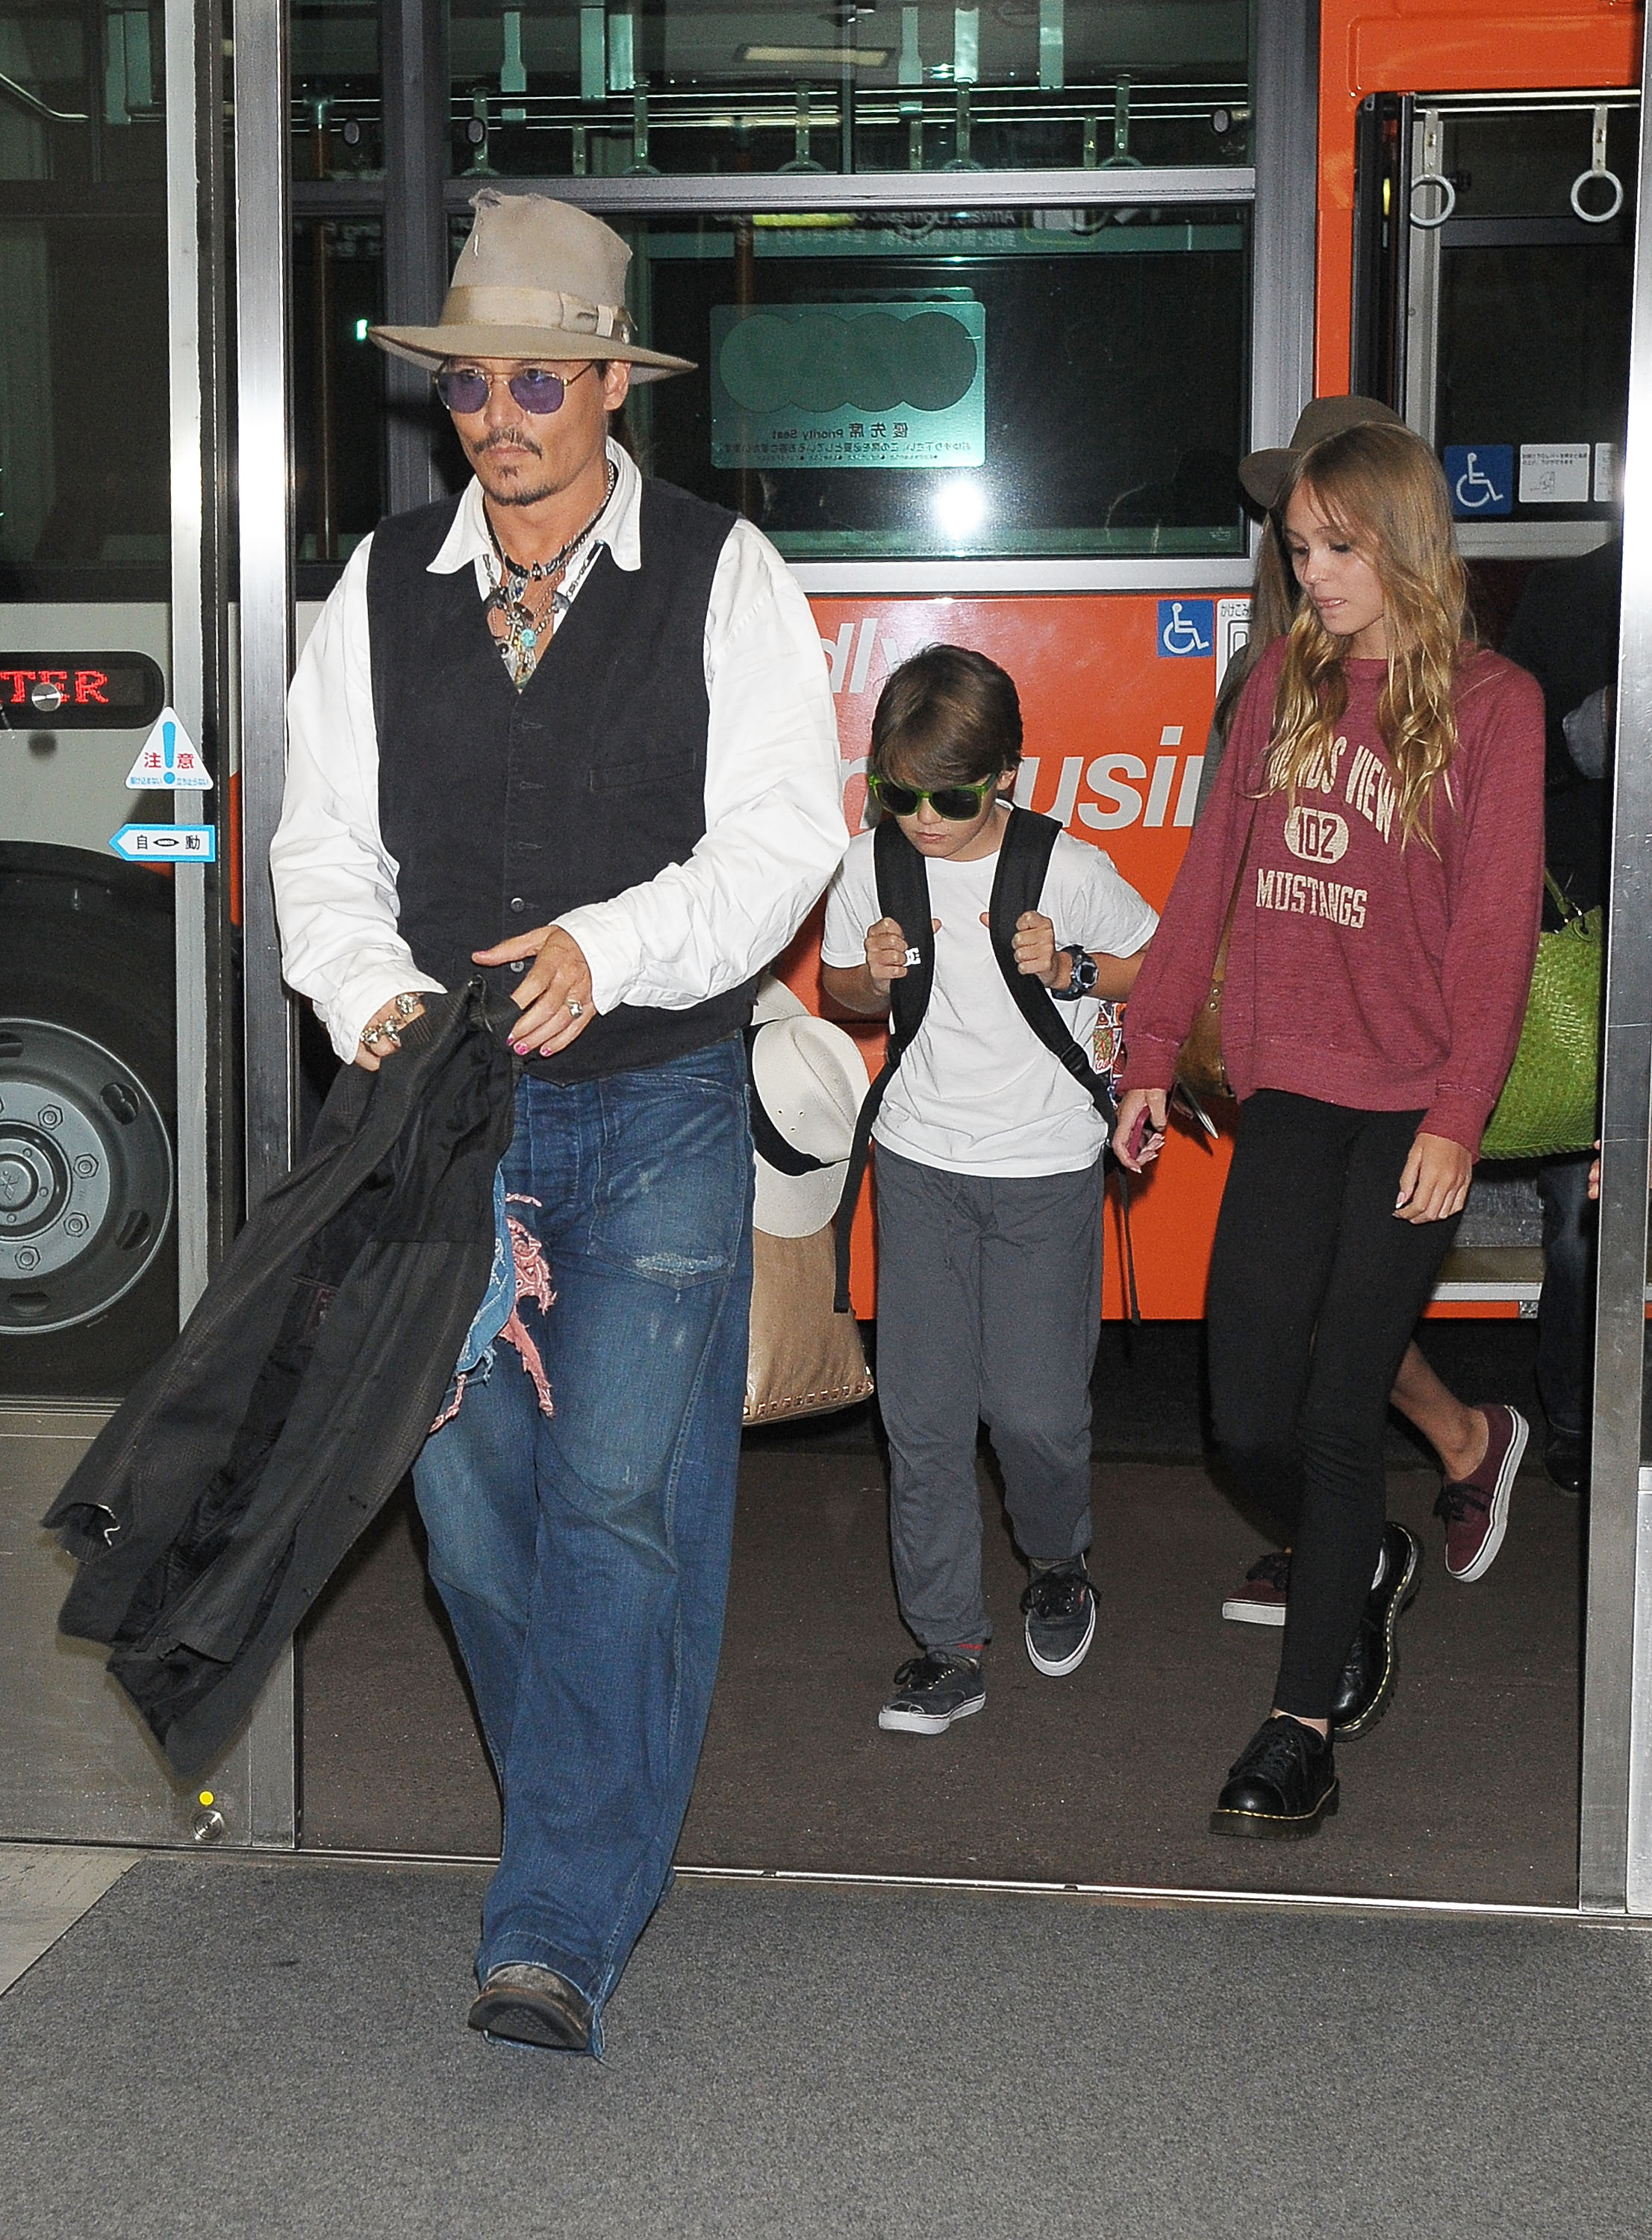 Johnny Depp, Jack Depp, and Lily-Rose Melody Depp pictured arriving at Narita International Airport on July 16, 2013 in Narita, Japan. | Source: Getty Images